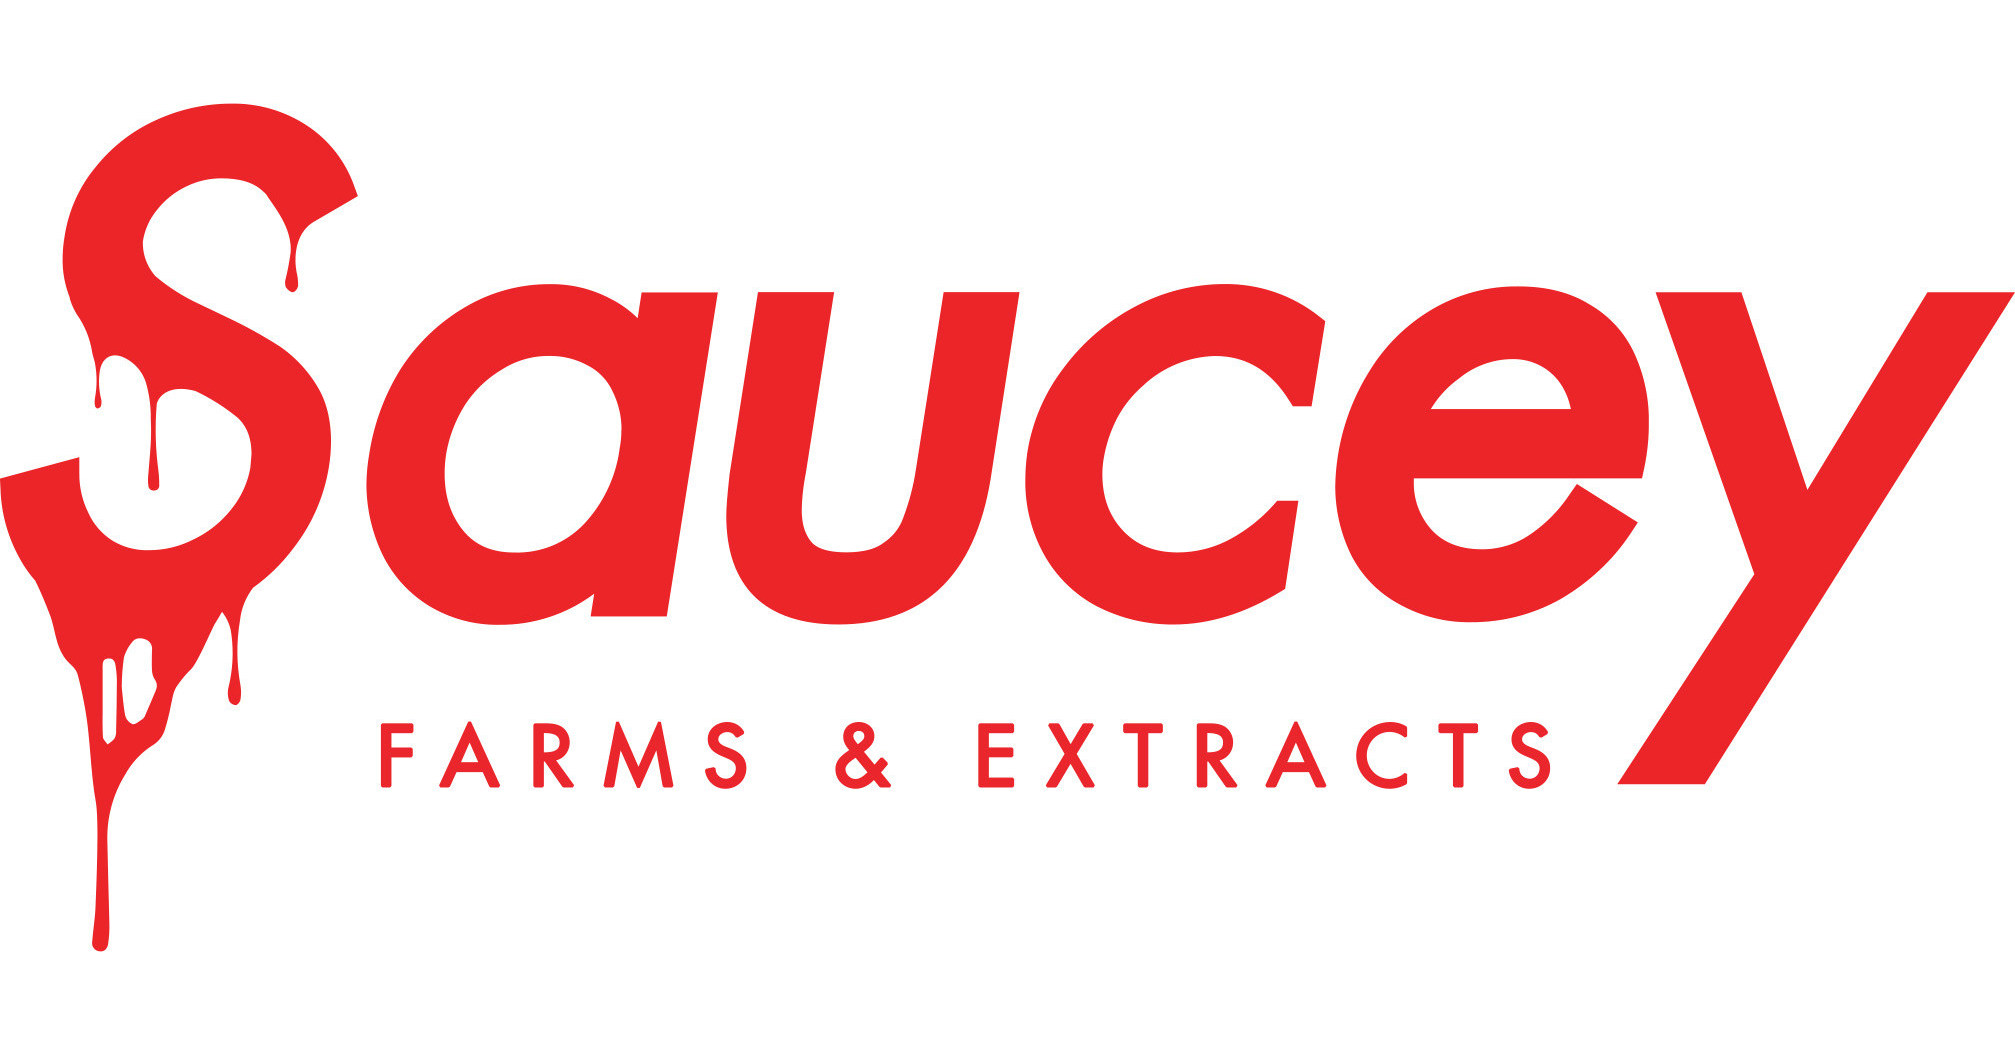 SAUCEY FARMS & EXTRACTS PARTNERS WITH HIGHER LIFE CBD TO LAUNCH THE FIRST THC PRODUCTS IN THE METAVERSE